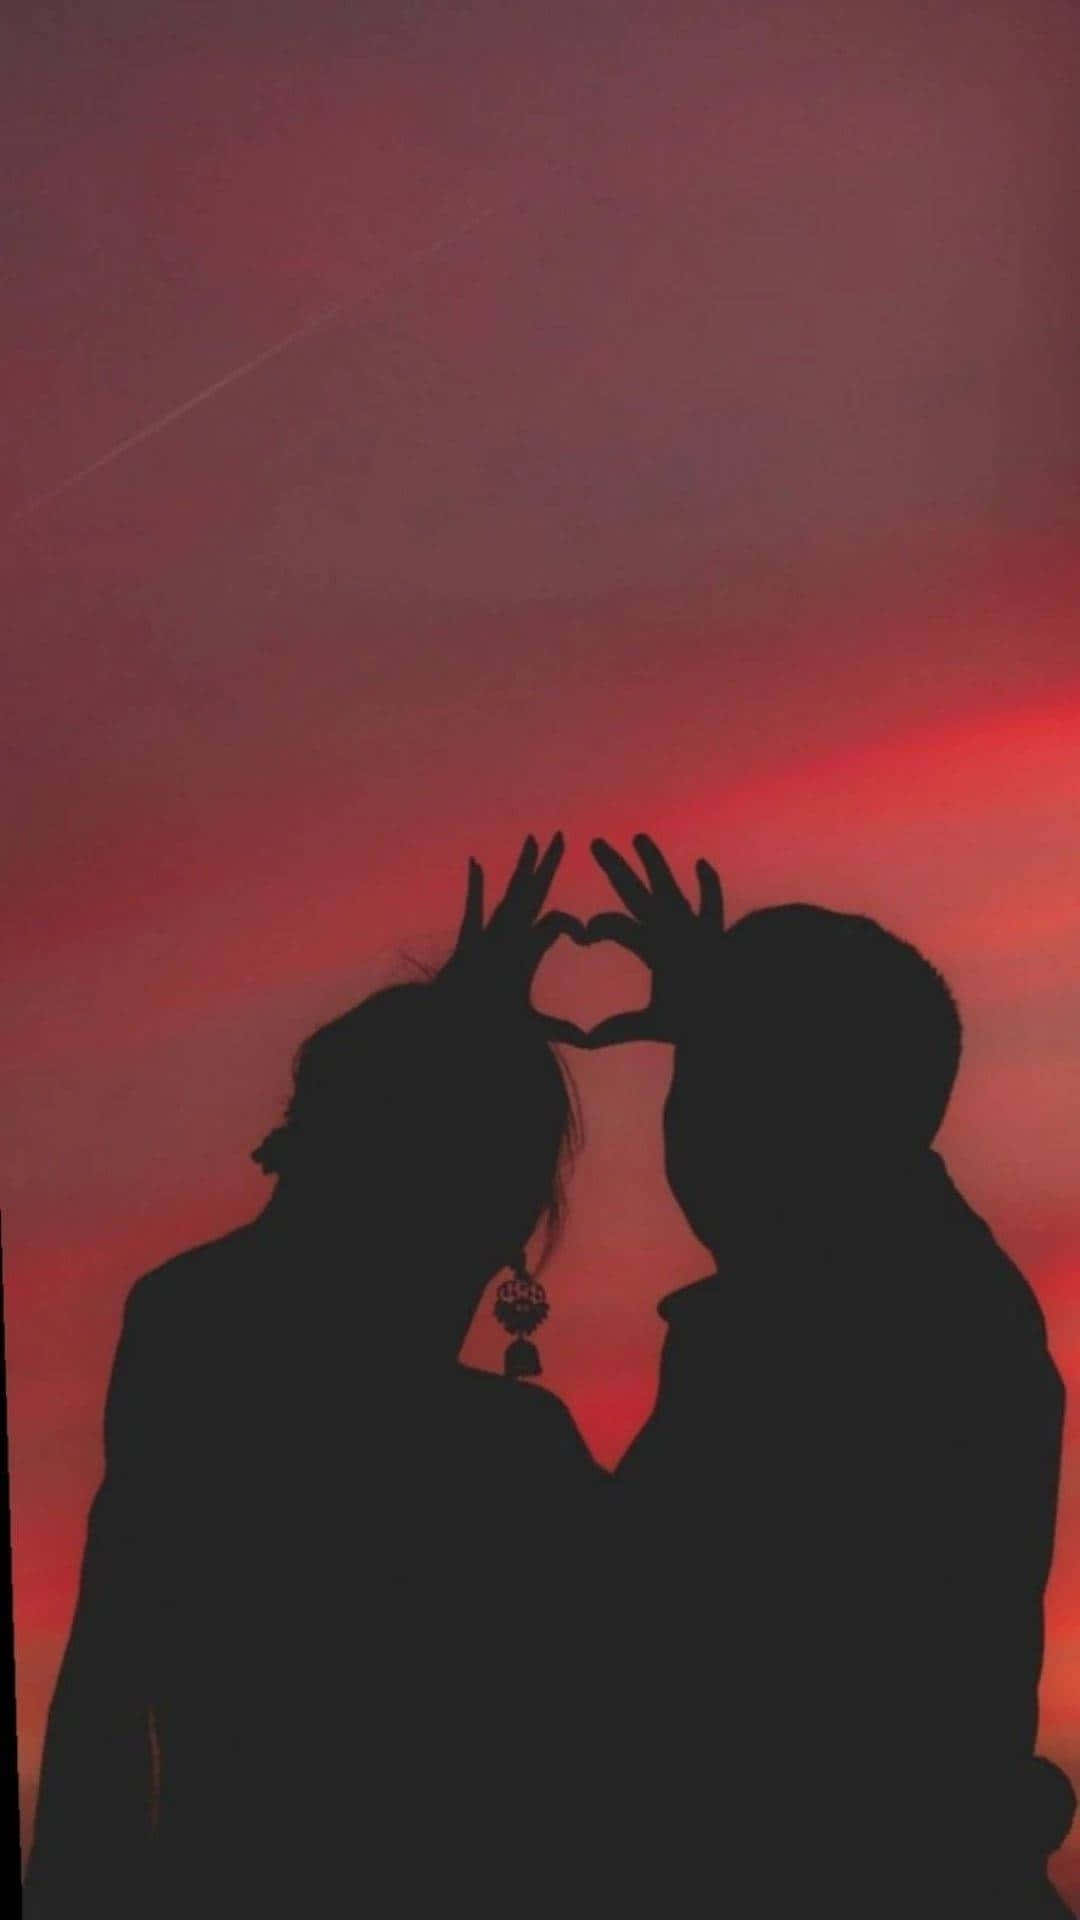 Download Relationship Cute Couple Enjoy Sunset Pictures | Wallpapers.com